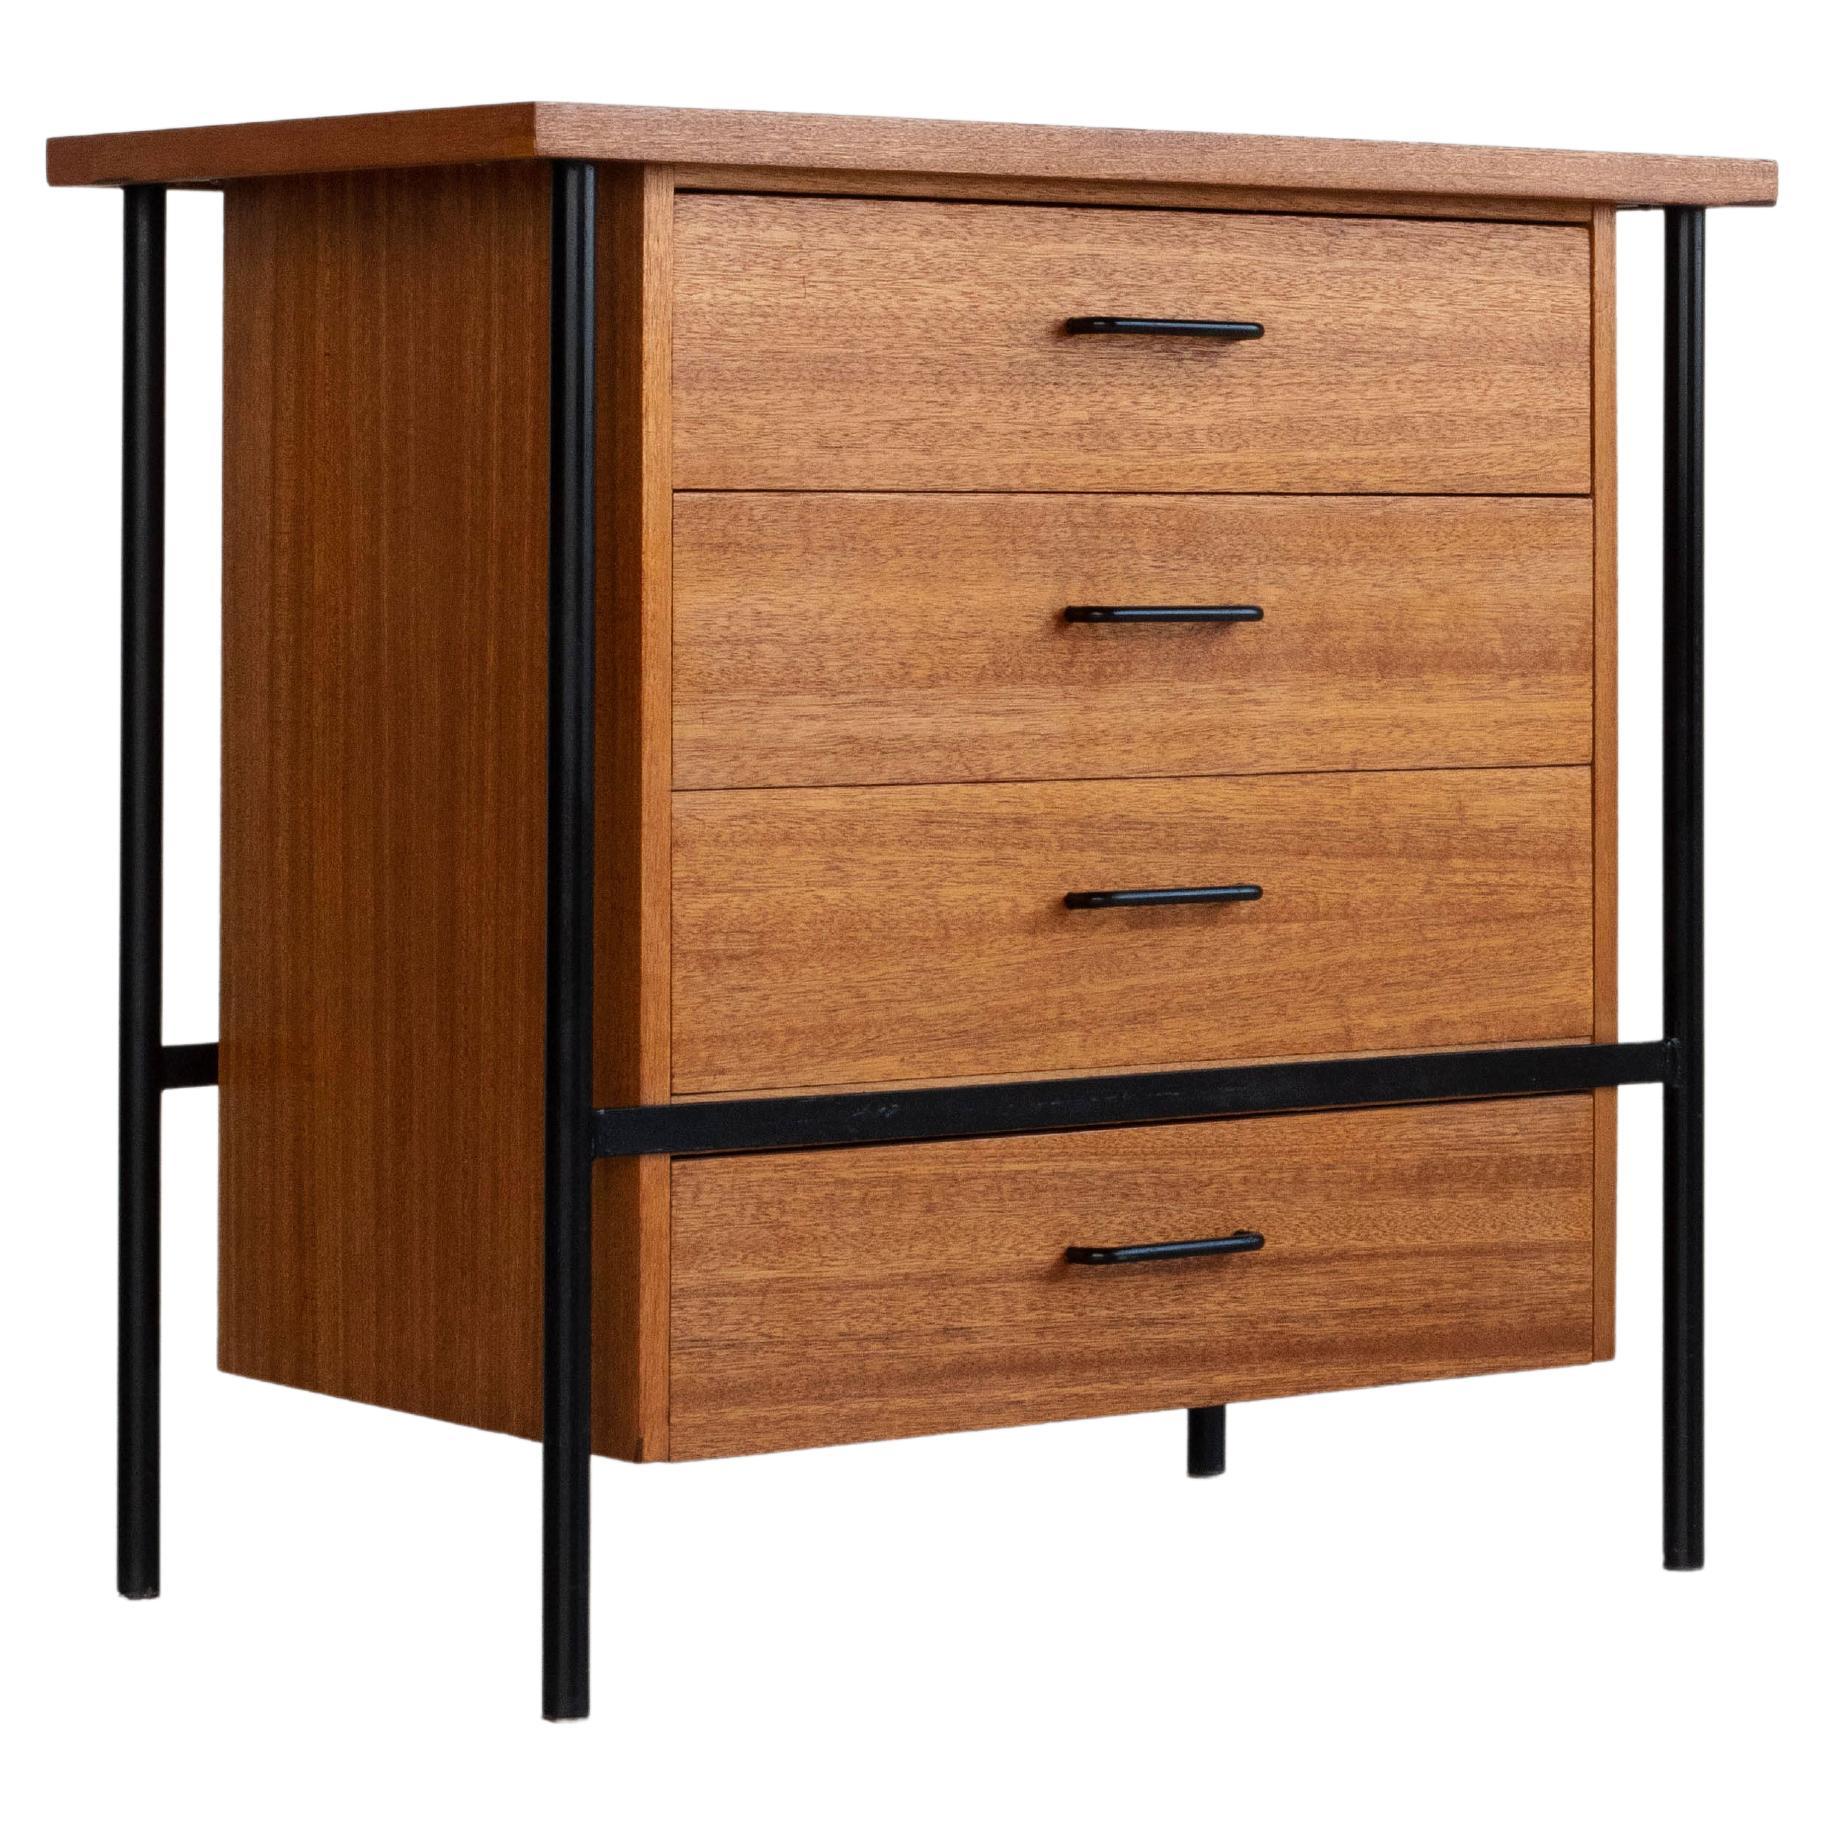 Donald Knorr Mahogany and Steel Dresser for Vista of California, 1950s